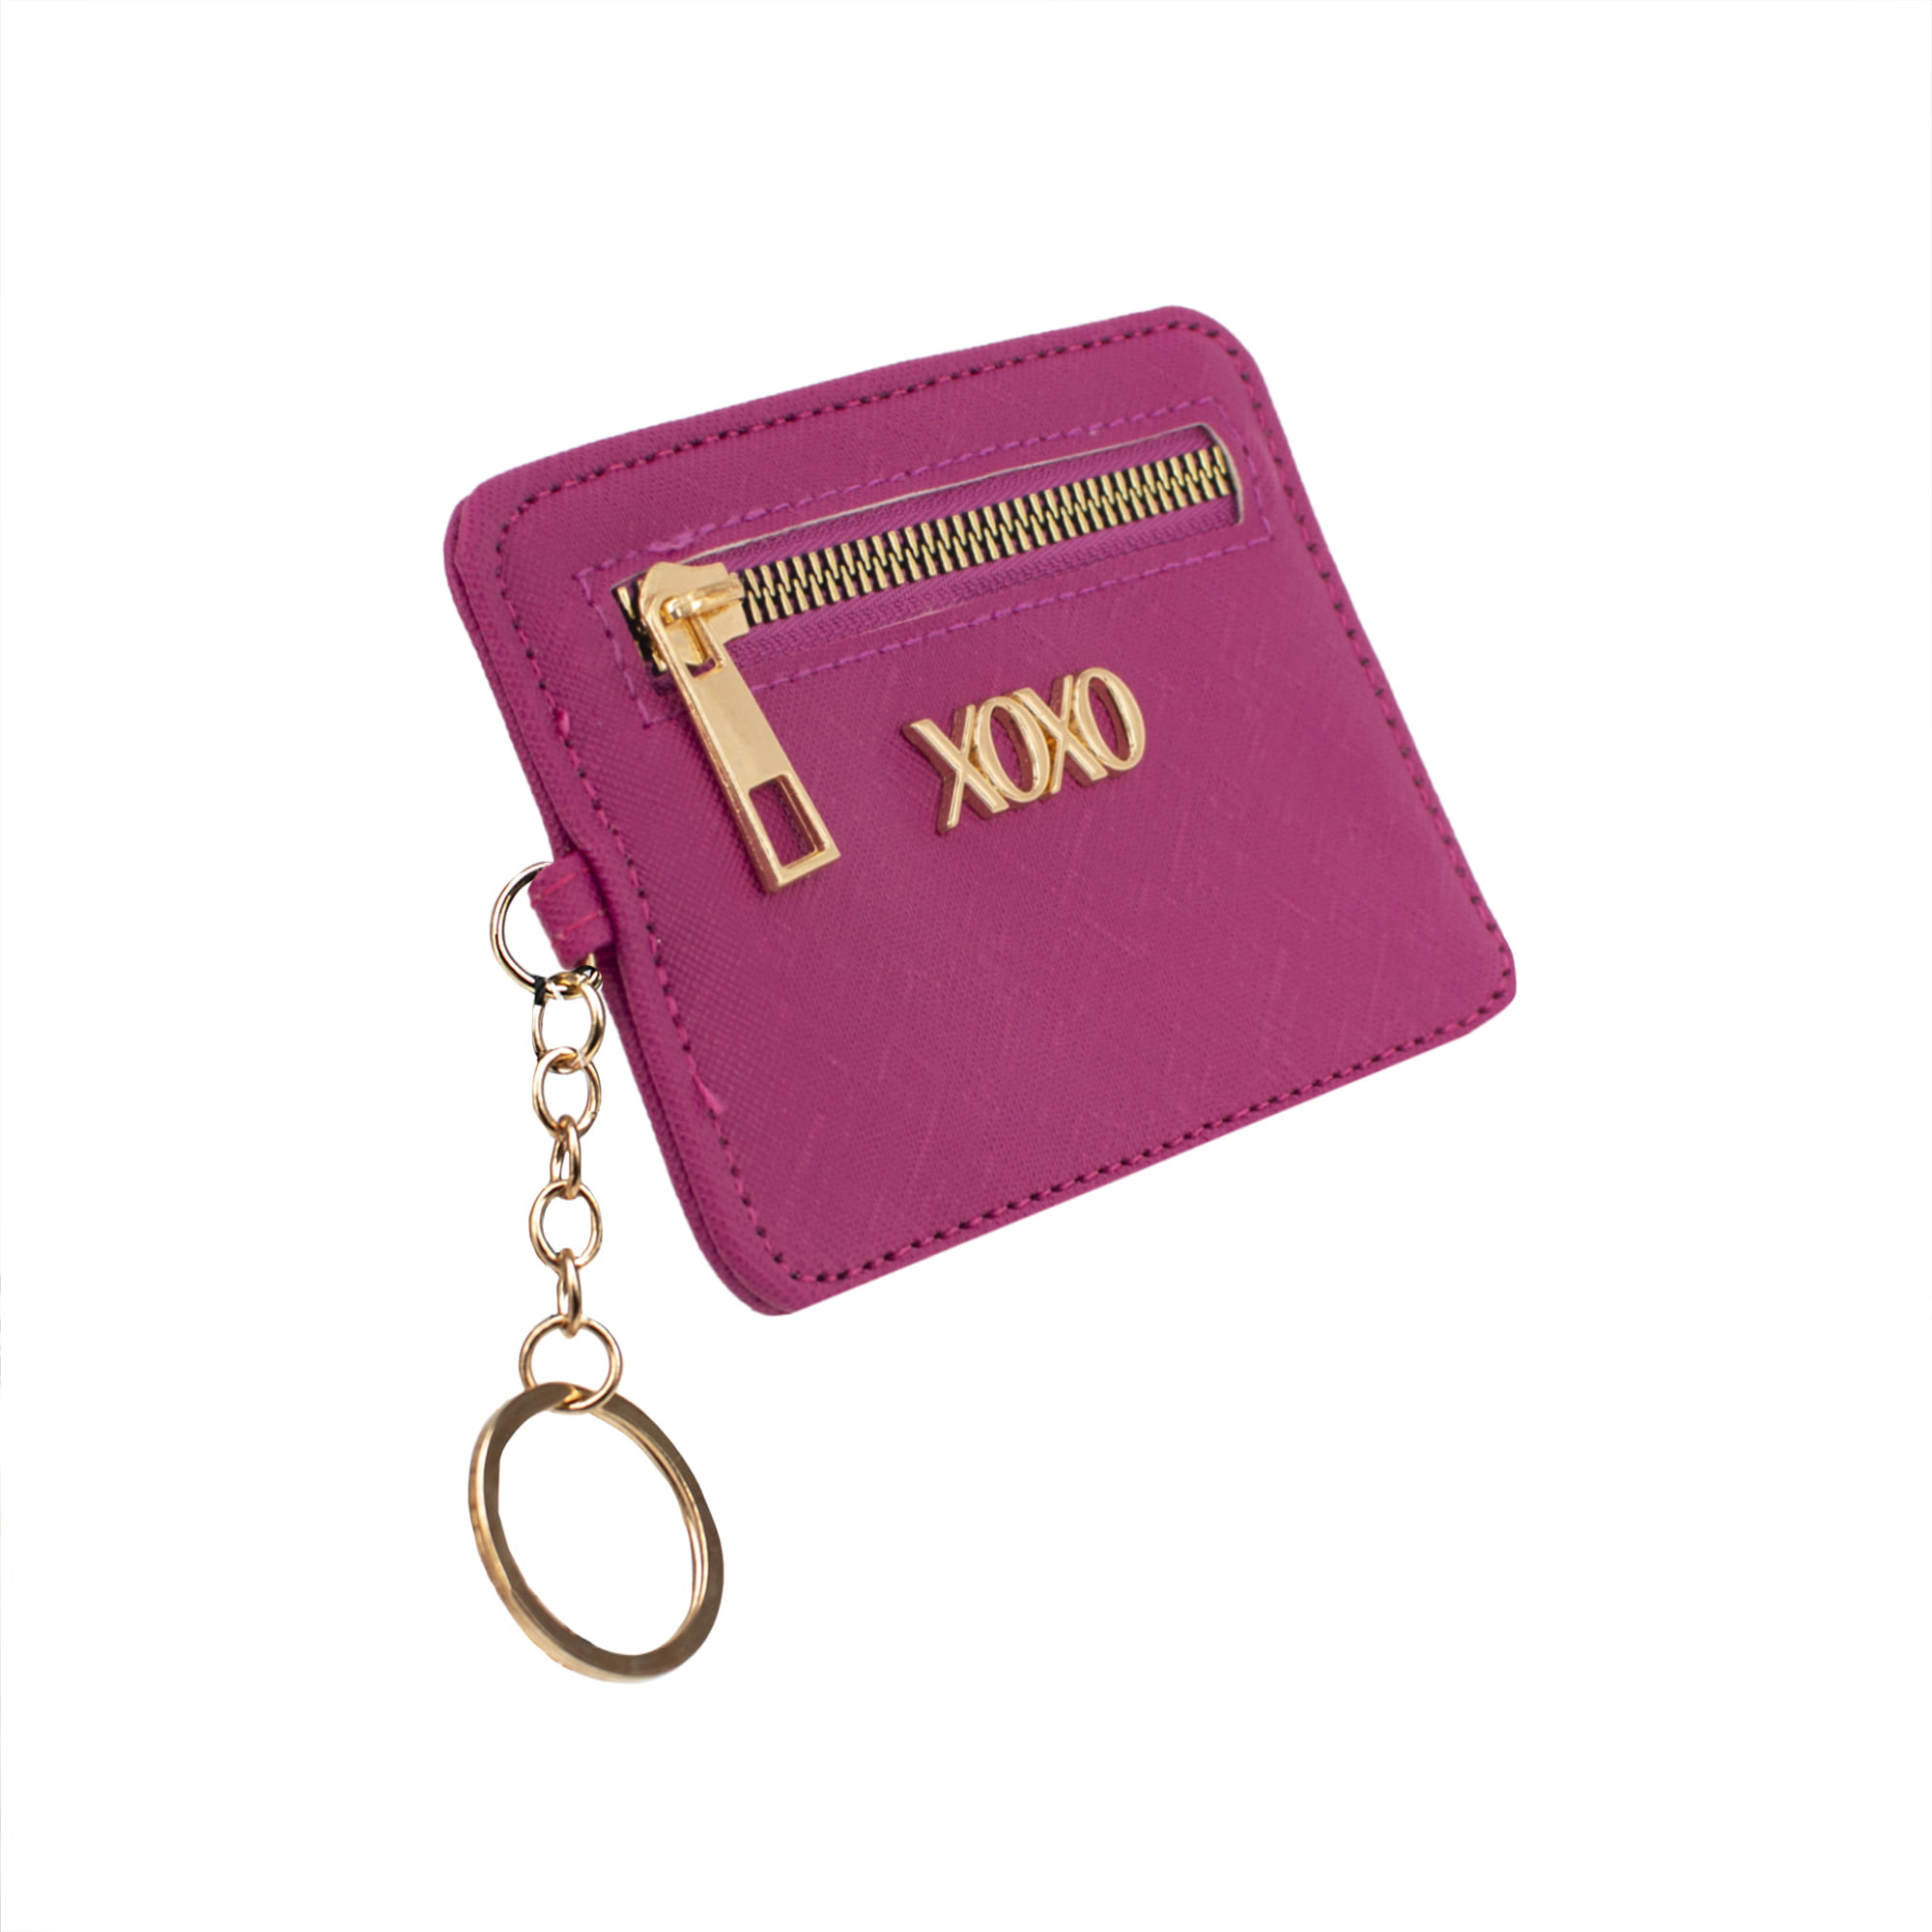 XOXO Wristlet Wallet for Women - Double Zip Vegan Leather Wallet - Large  Capacity Travel Clutch with Card Holders, 2 Cash Pockets and Phone Slot 